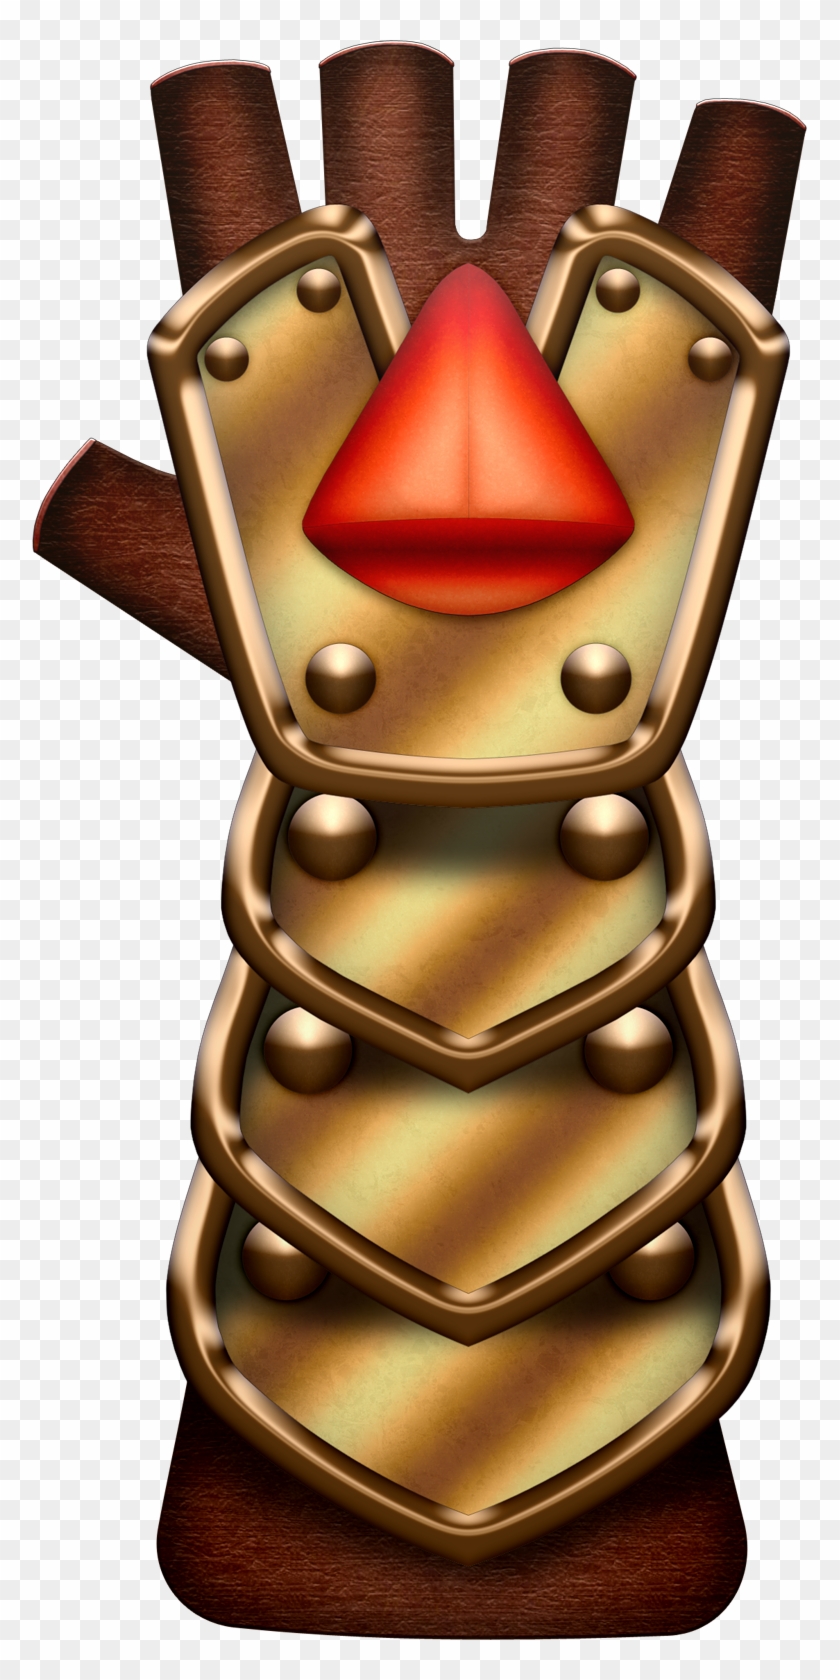 Oot Gold Gauntlet By Blueamnesiac Oot Gold Gauntlet - Silver Gauntlets Ocarina Of Time #1033653